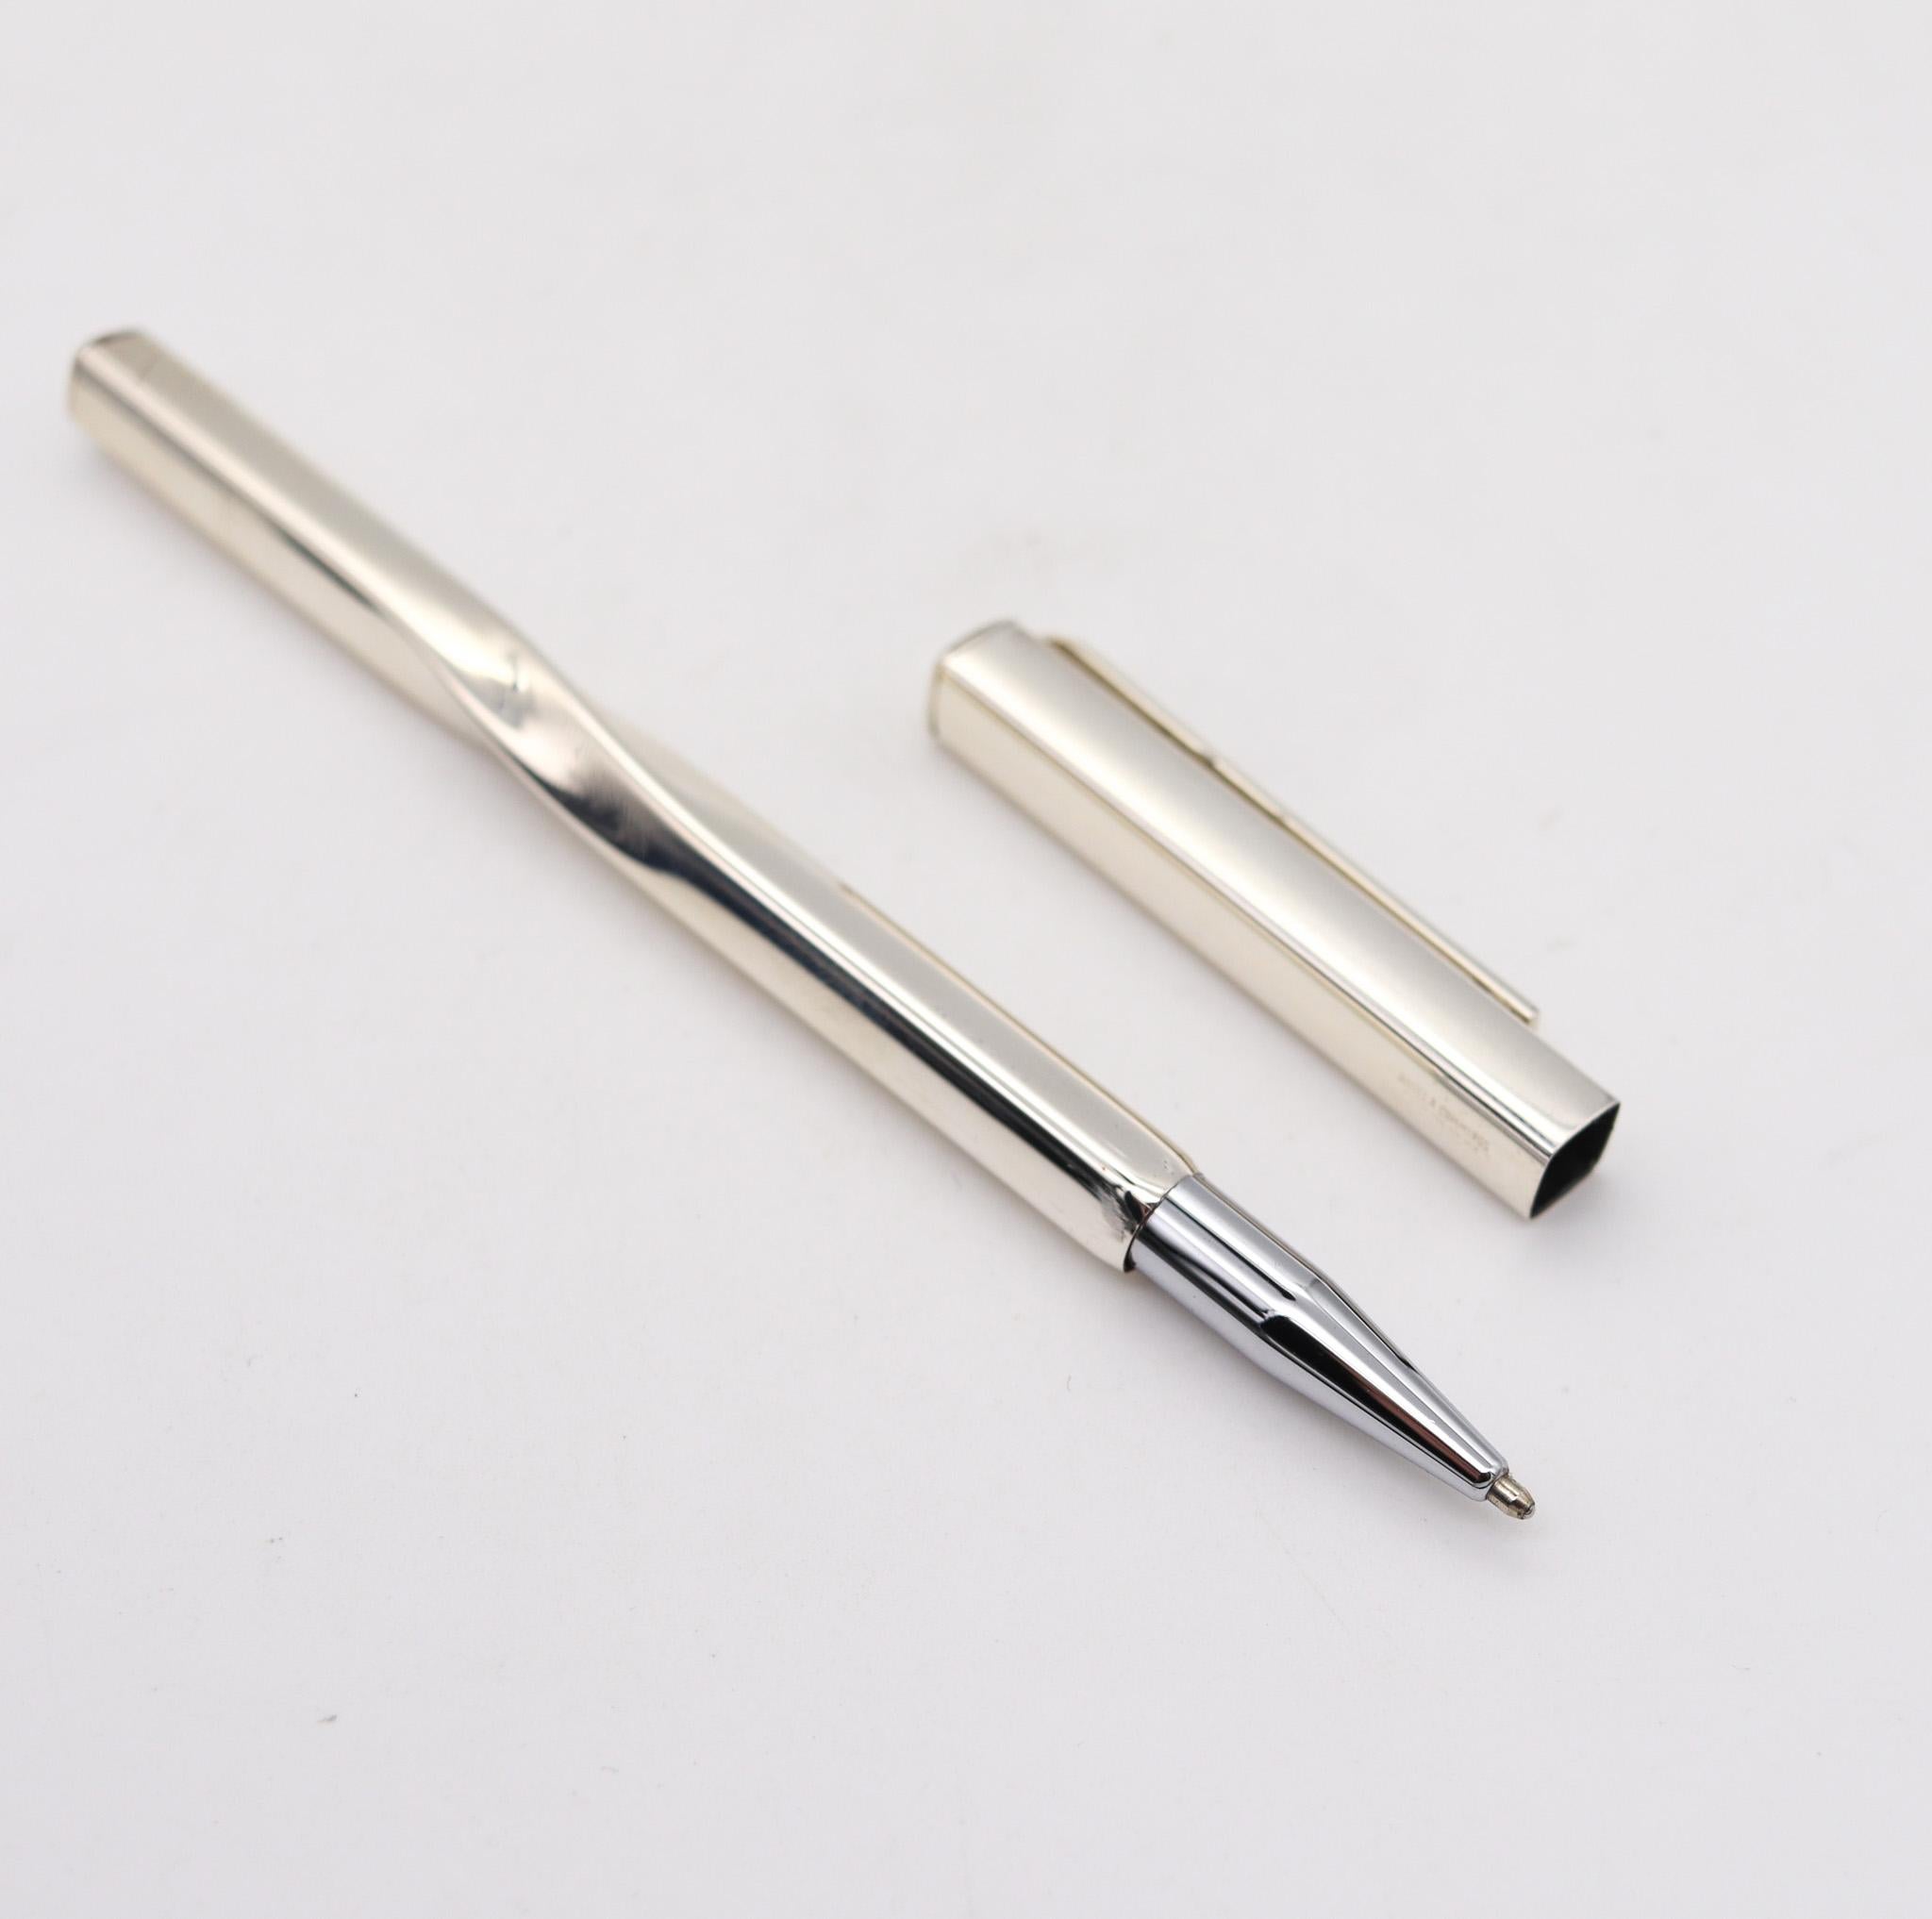 Tiffany & Co. 1981 Angela Cummings Aerodynamic Twisted Pen .925 Sterling Silver In Excellent Condition For Sale In Miami, FL